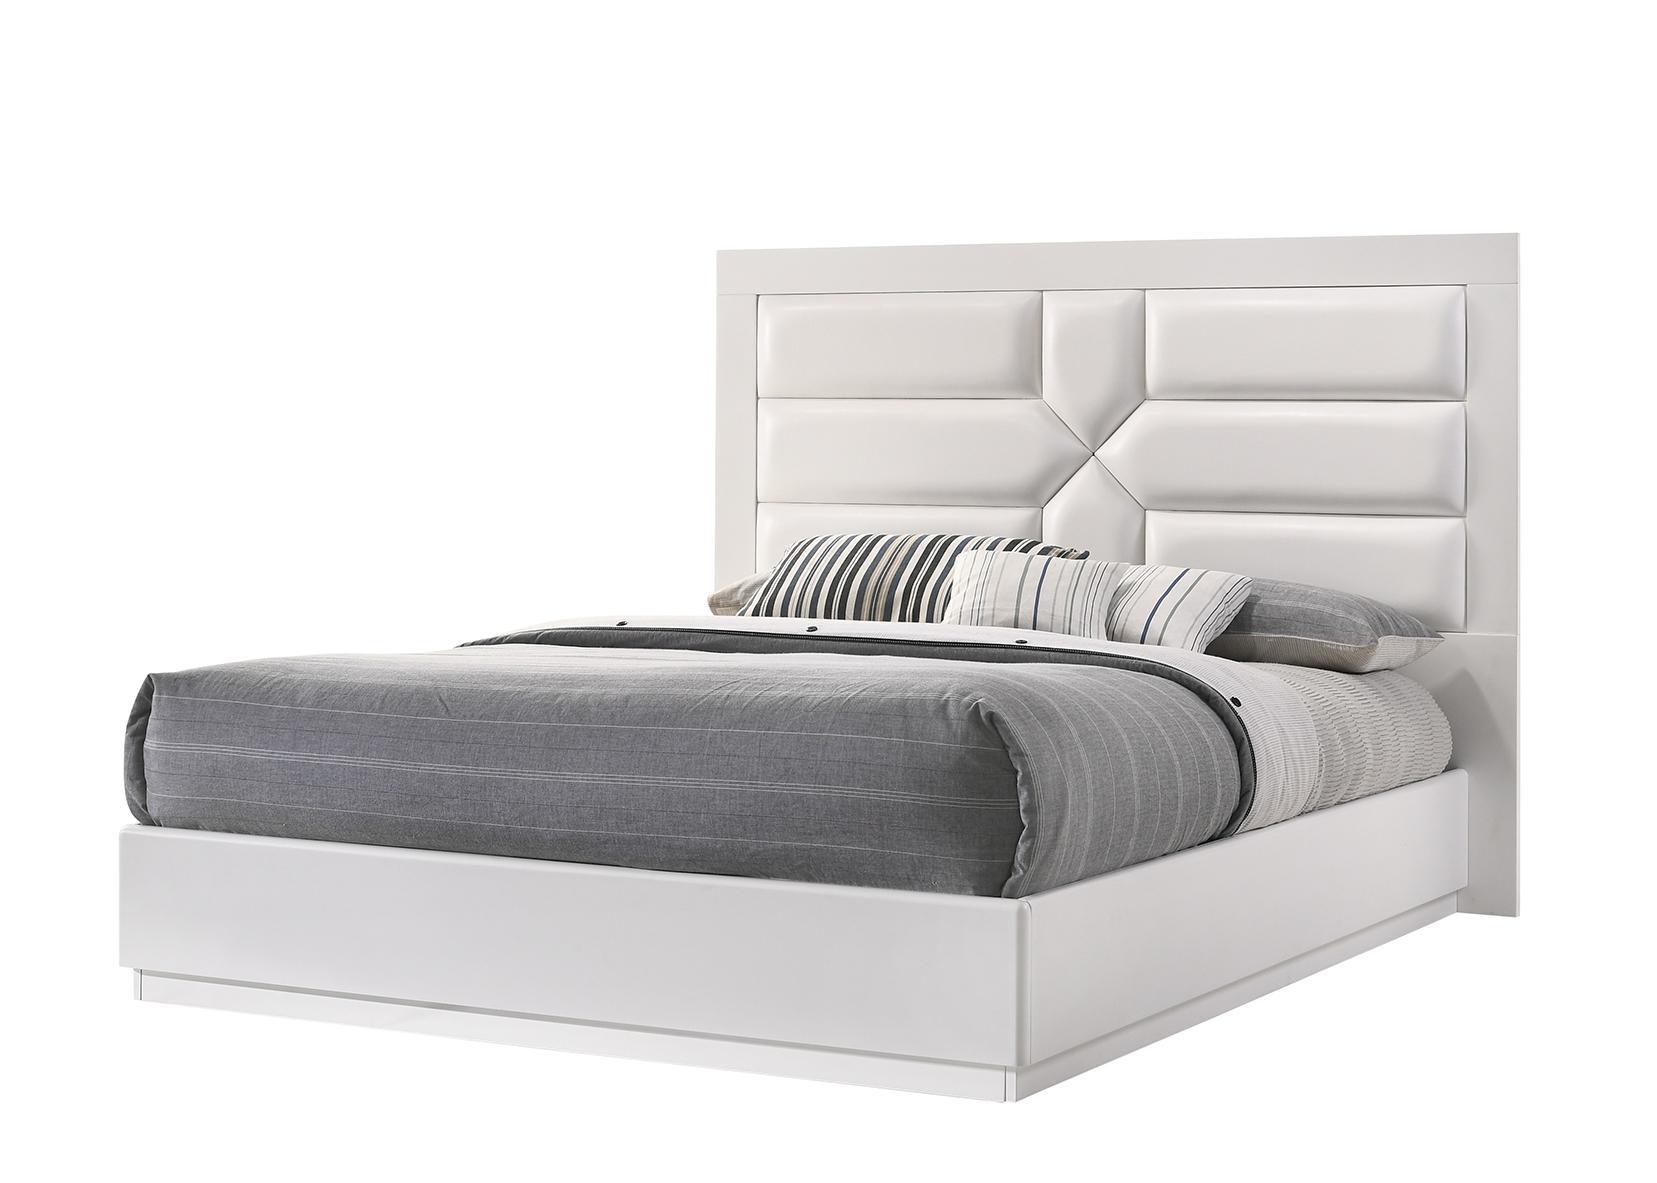 Contemporary Platform Bed Amsterdam AMSTERDAM-BED-QN in White Leatherette